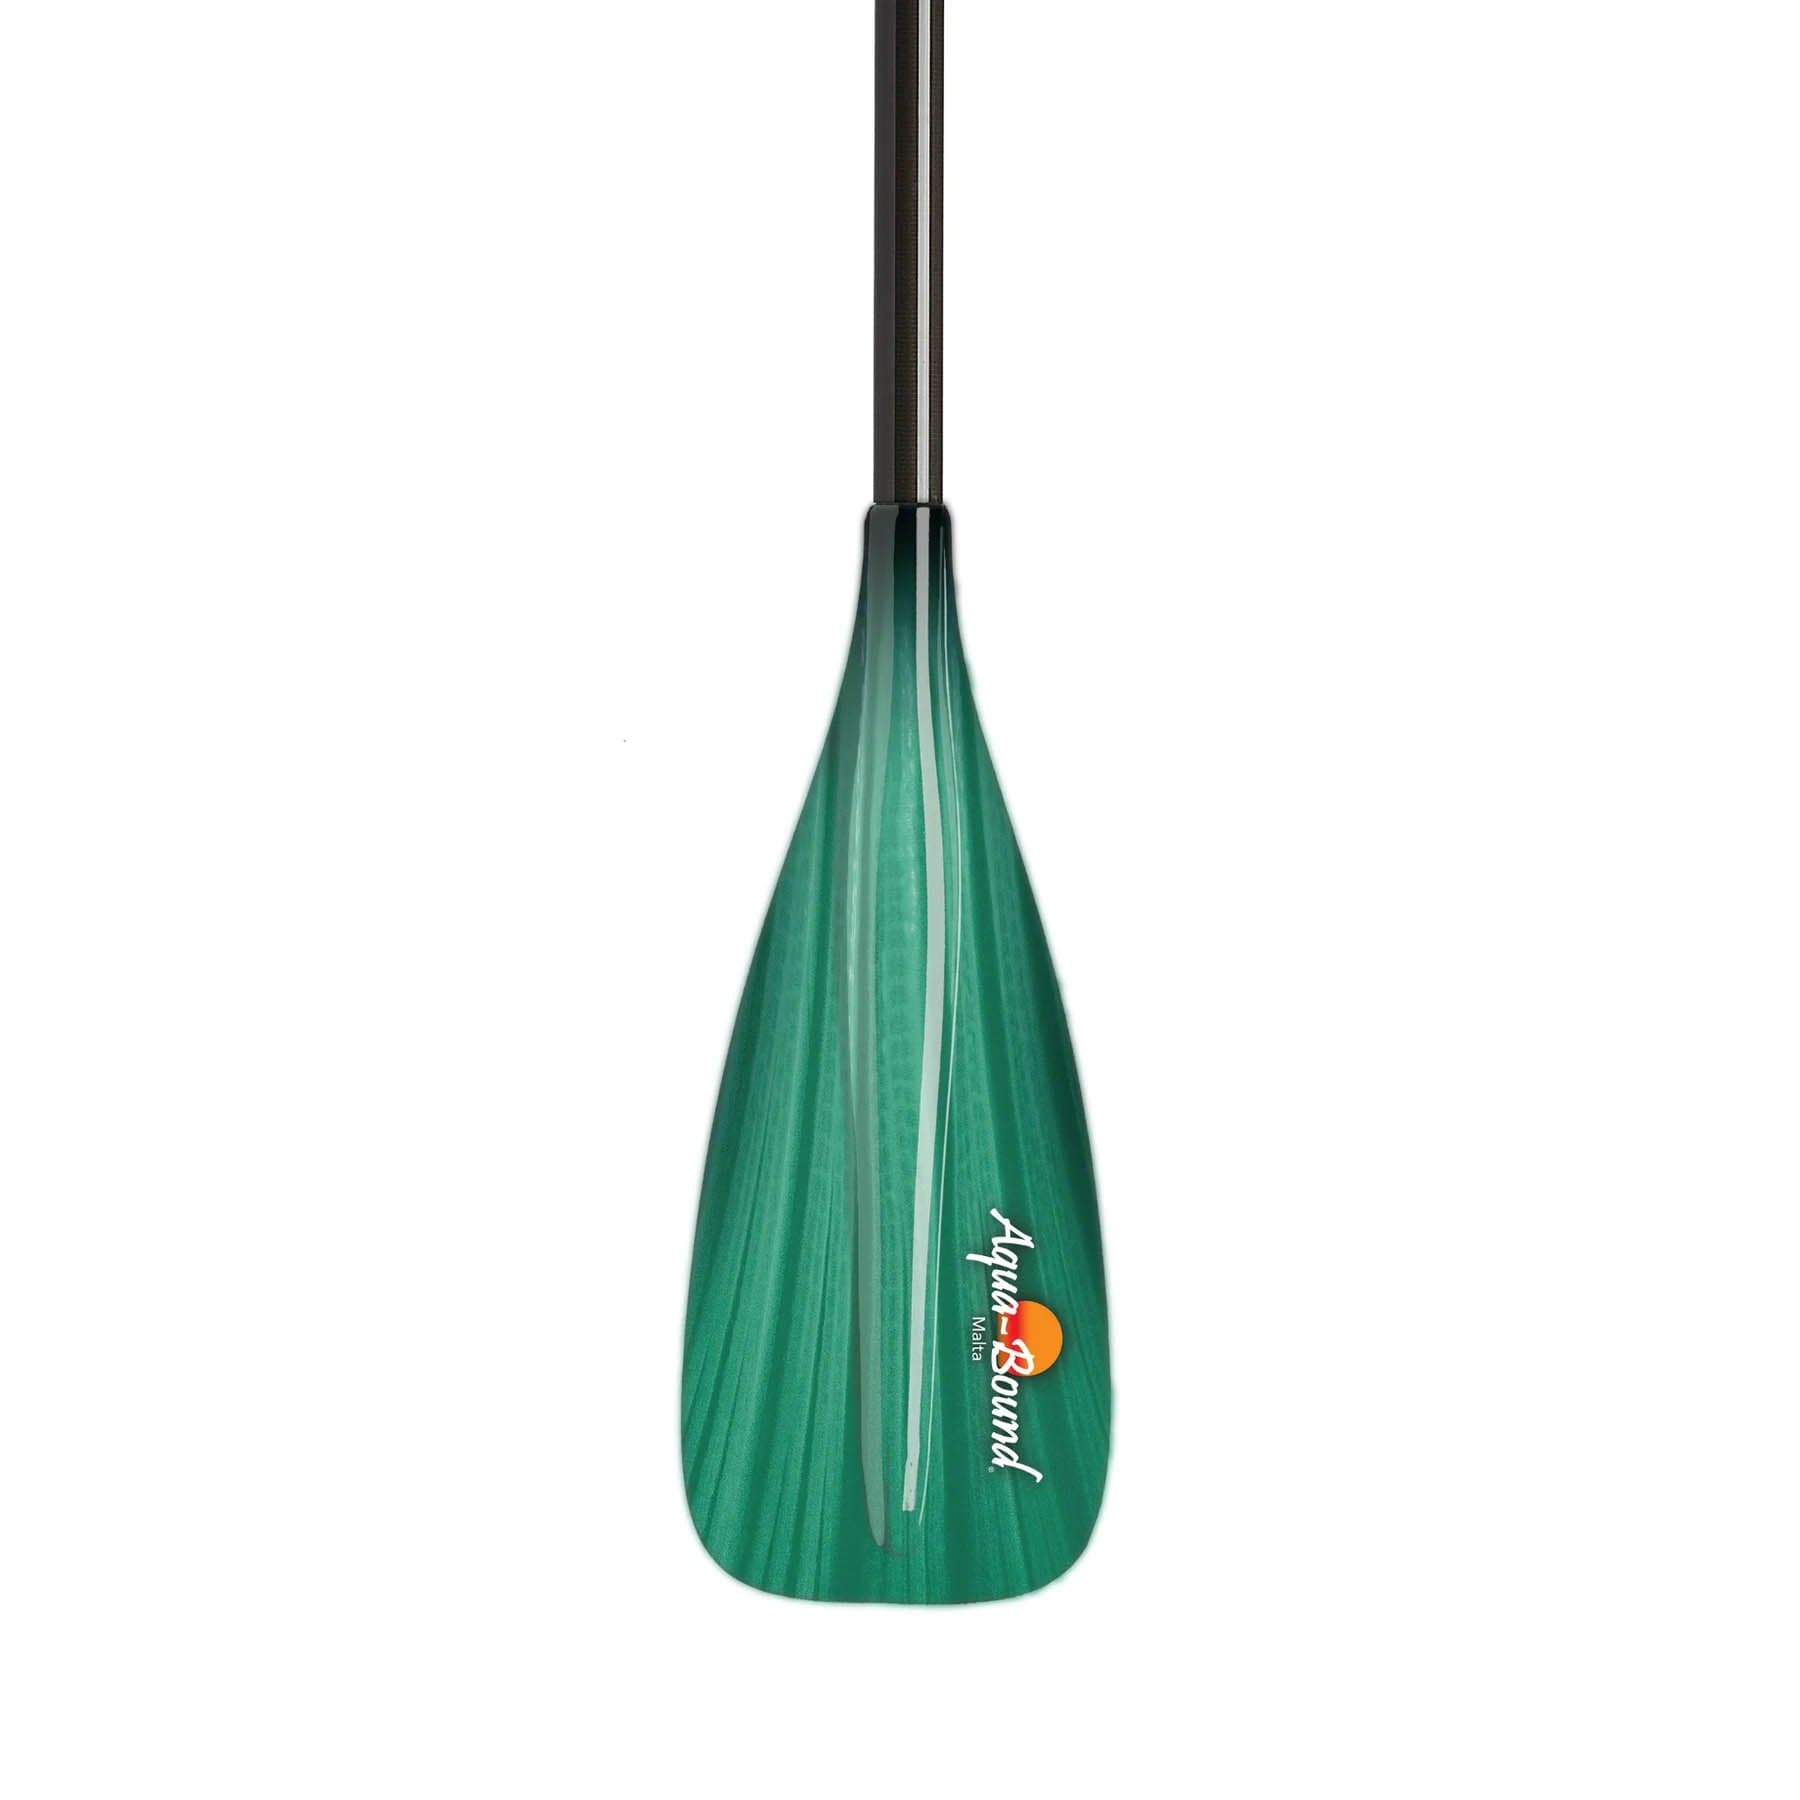 Featuring the Malta SUP Paddle 2-piece sup paddle manufactured by AquaBound shown here from a fourth angle.